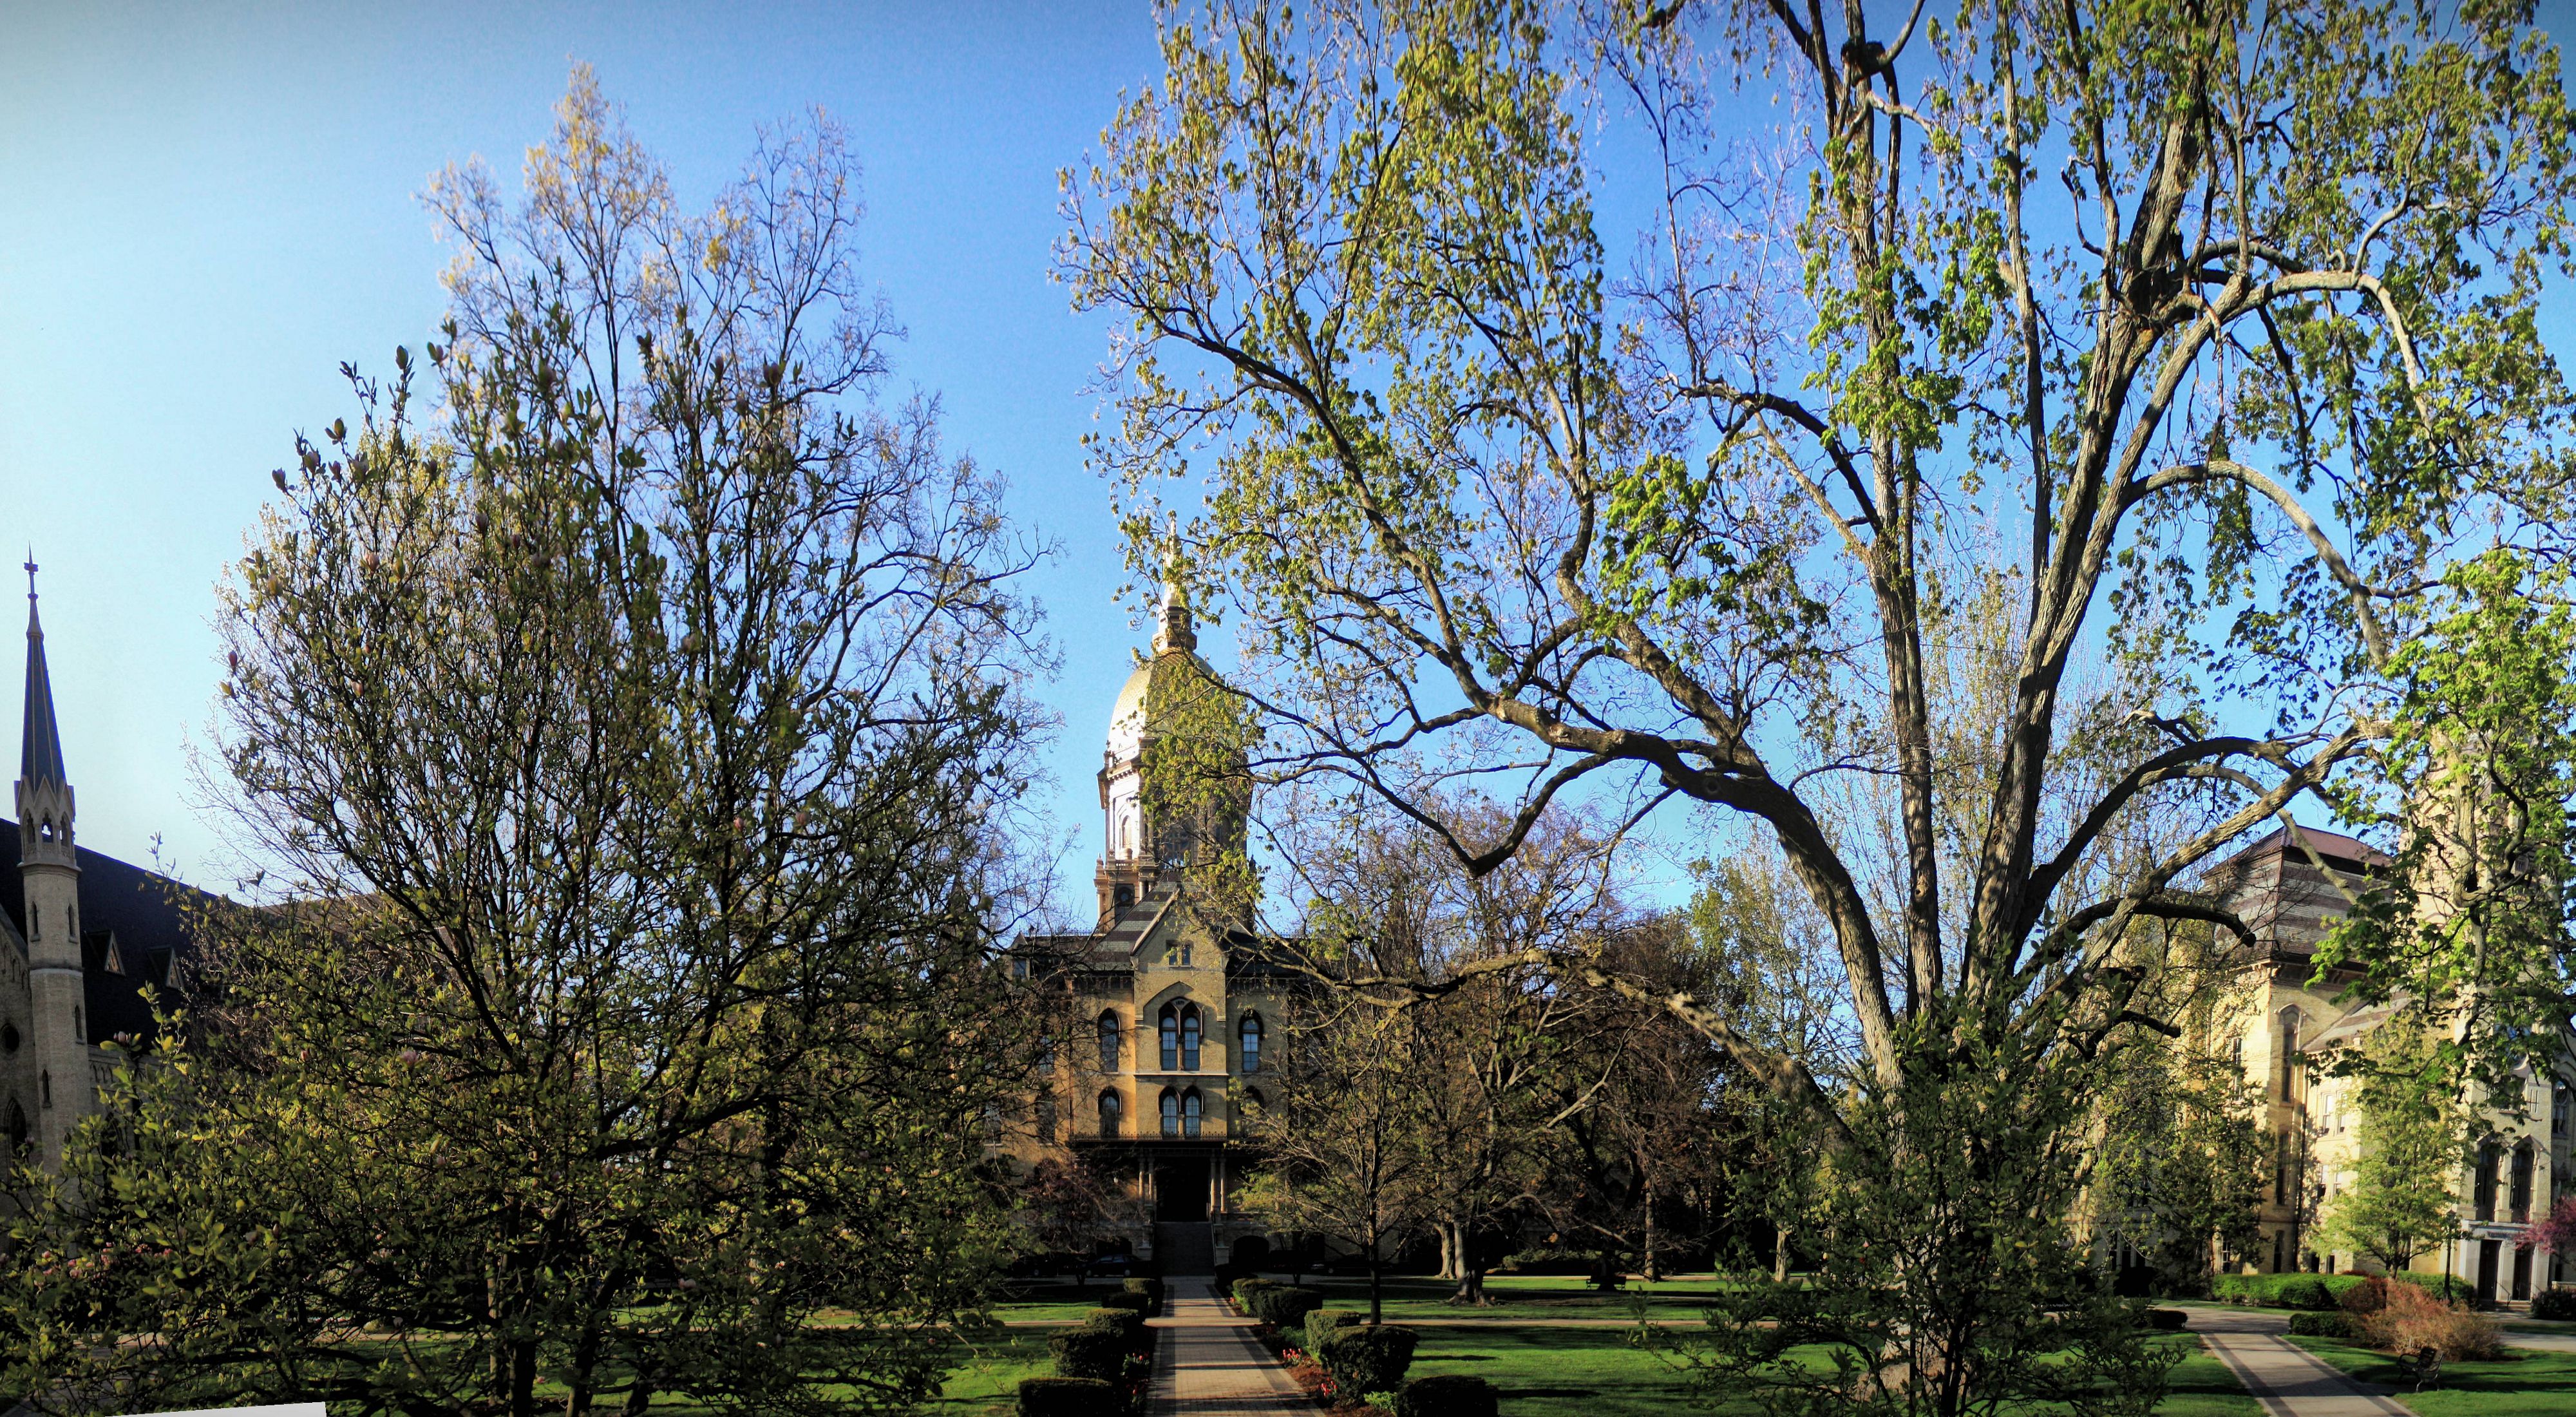 Buildings on University of Notre Dame campus in springtime.